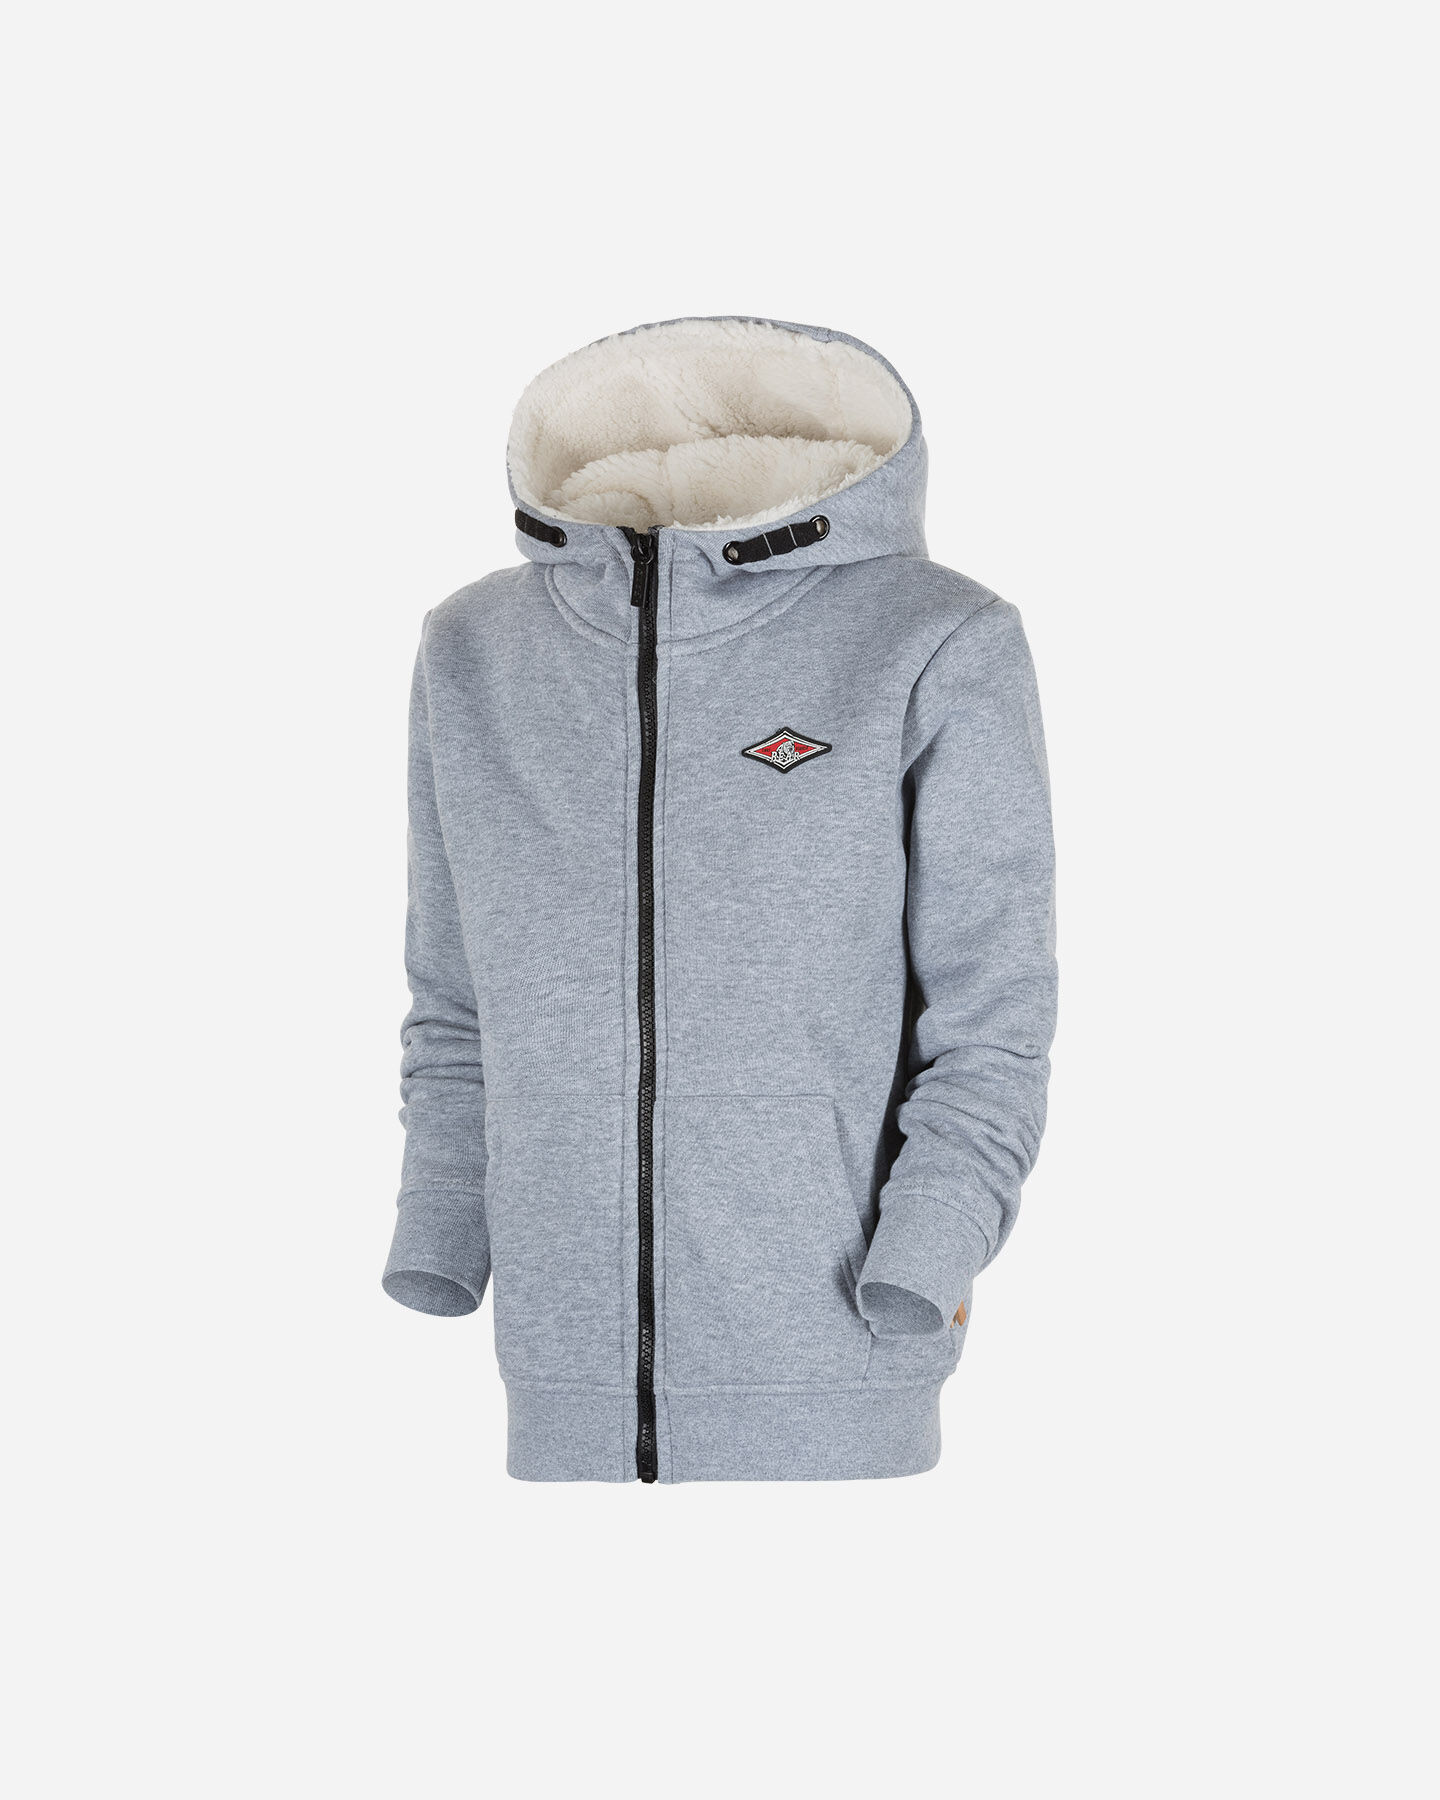  Pile sci BEAR CLASSIC HOODIE JR S4070125|1|14 scatto 0